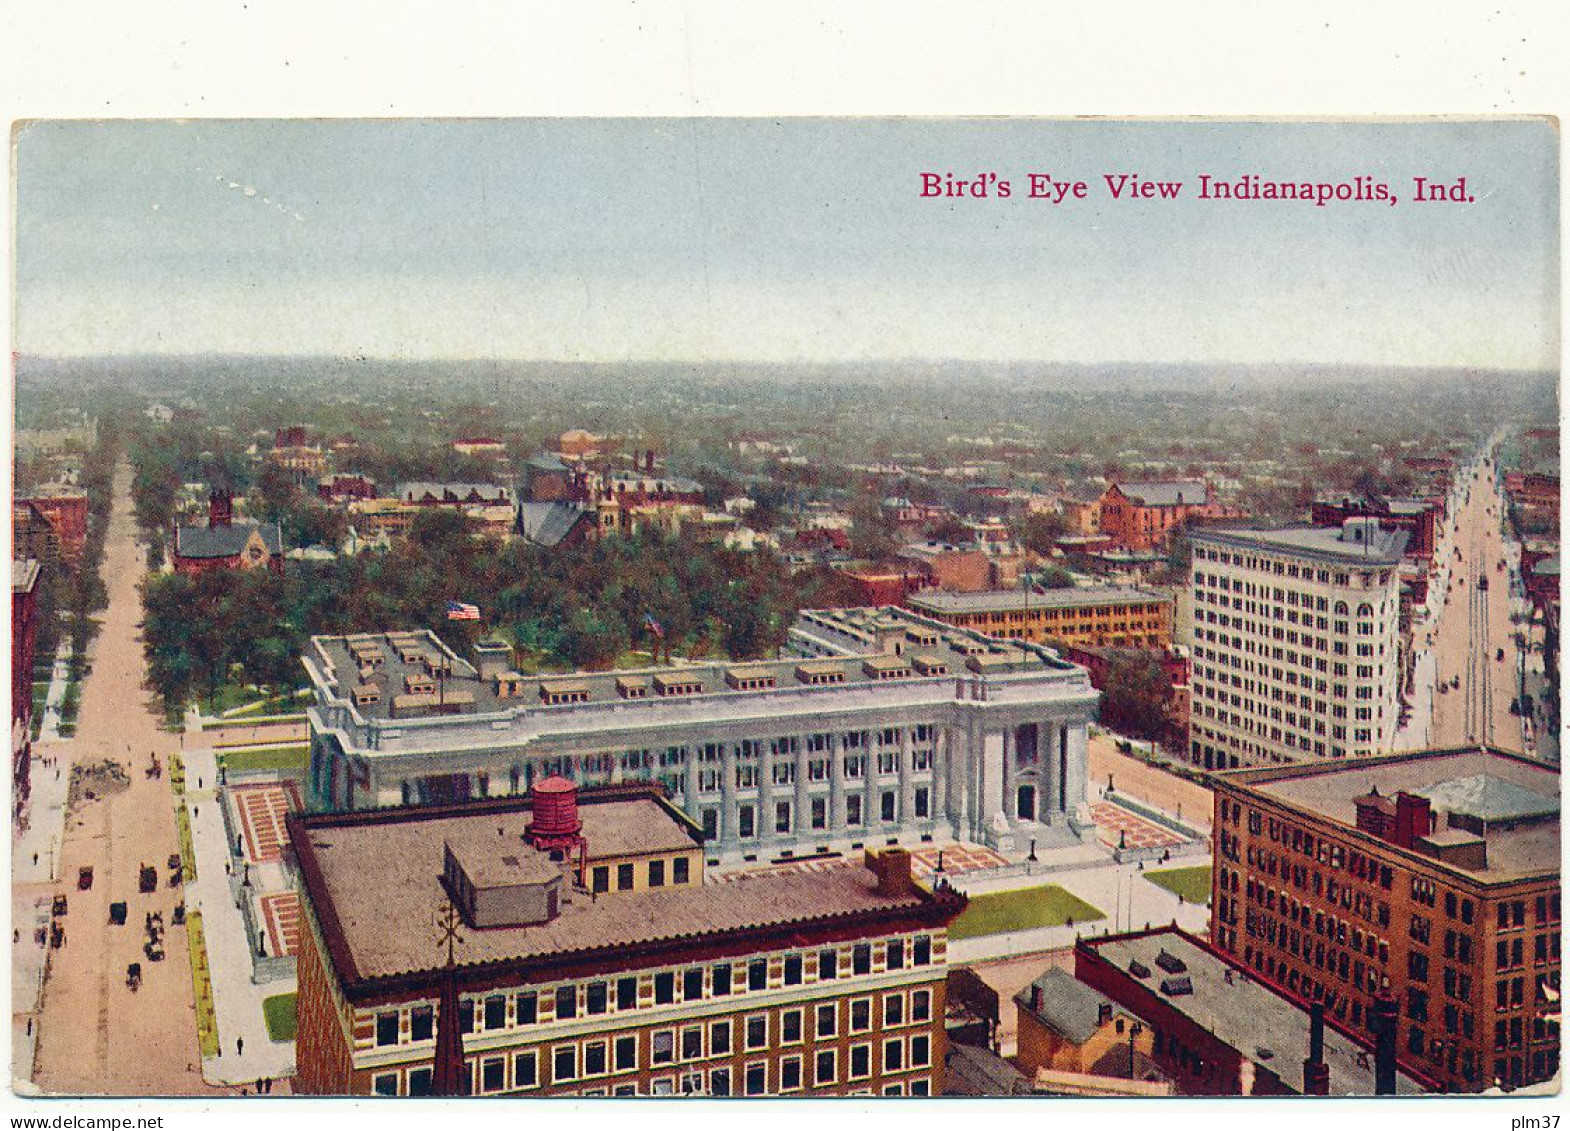 INDIANAPOLIS, IN - Bird's Eye View - Indianapolis